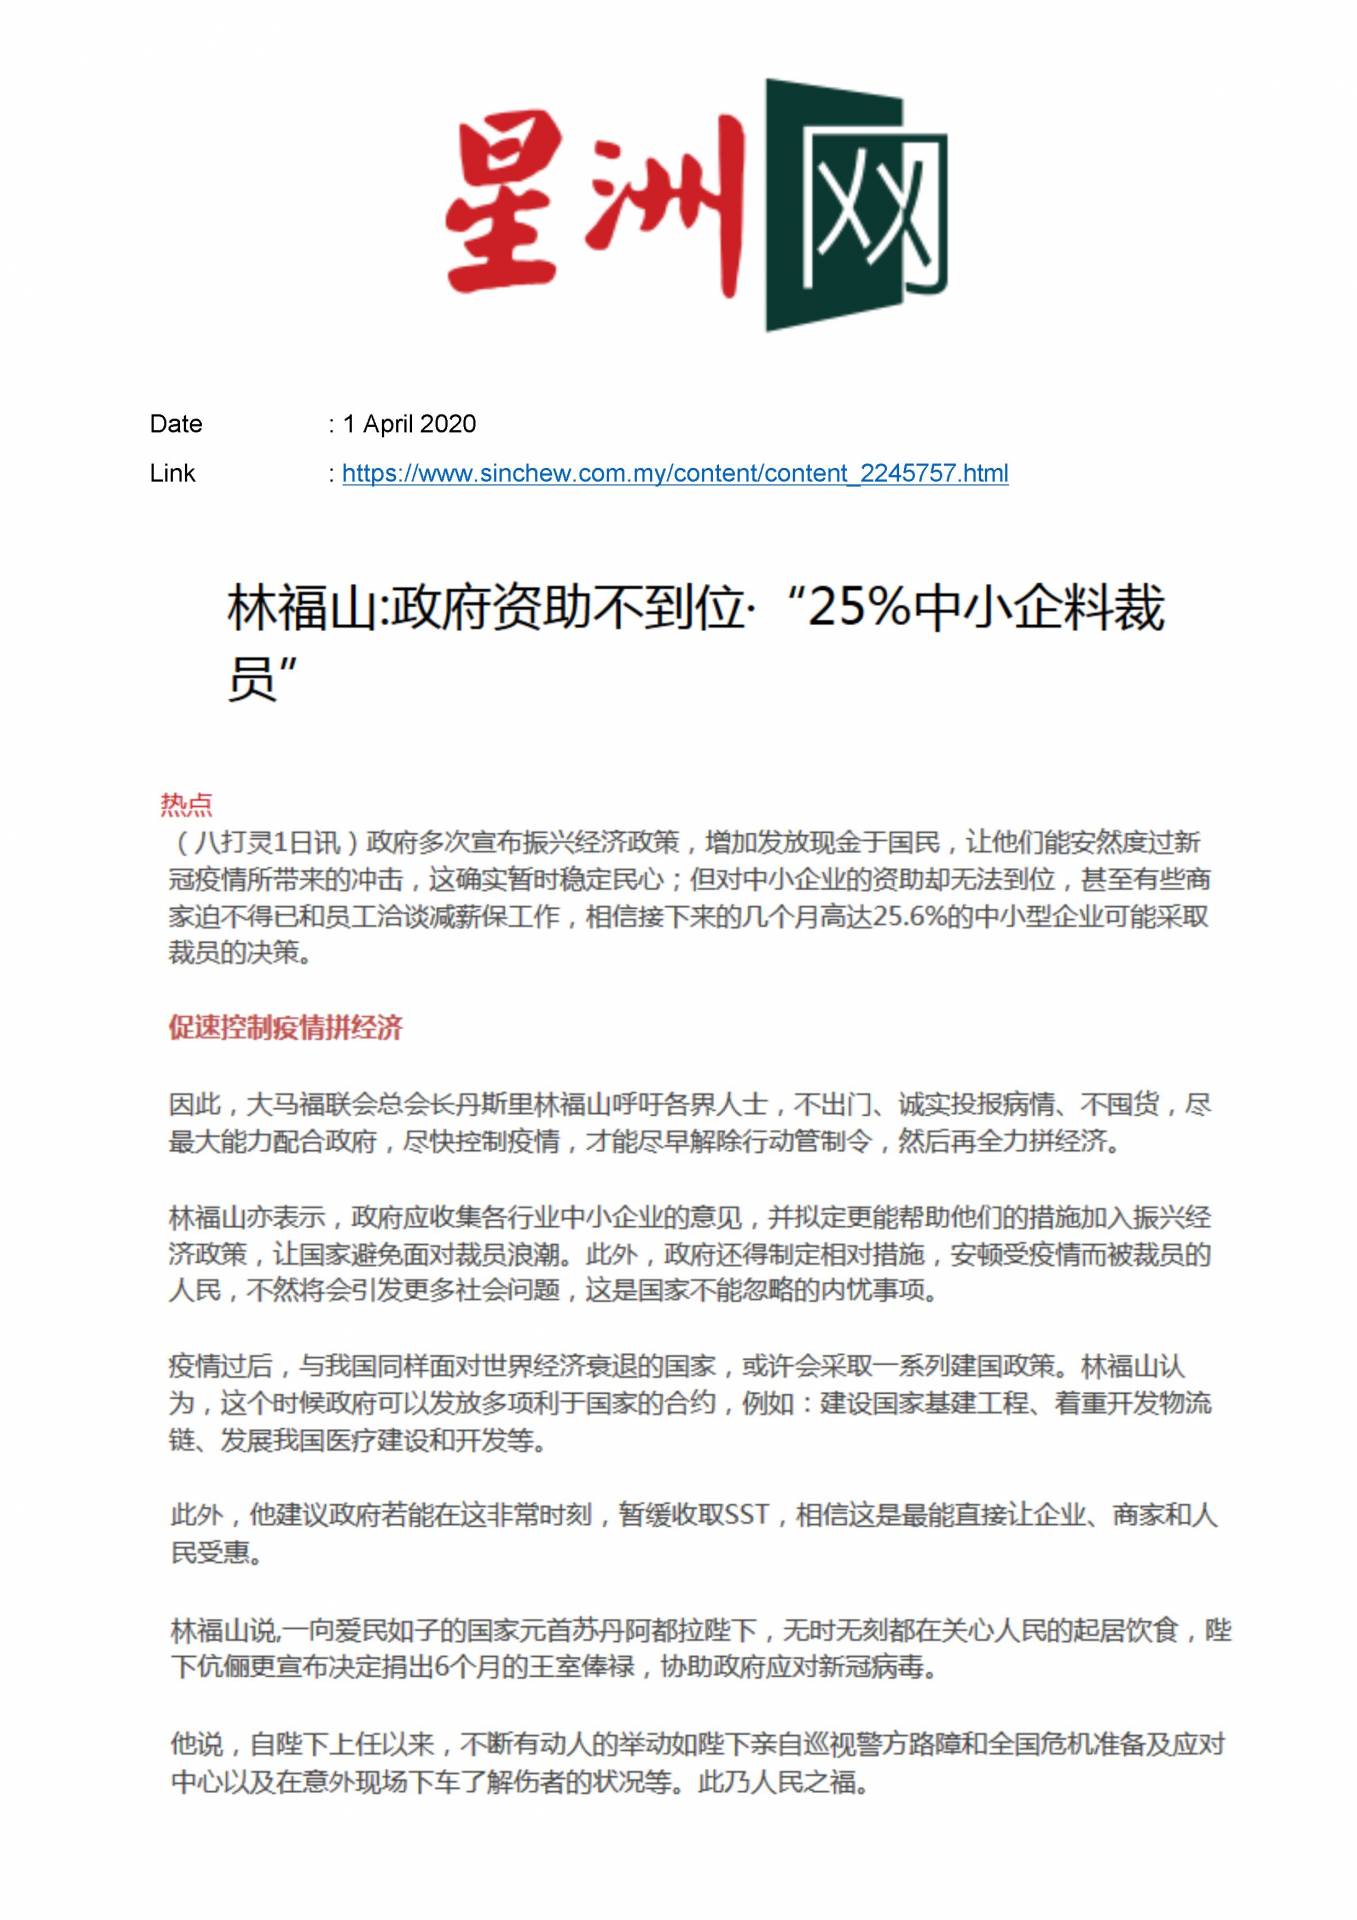 2020.04.01 Sin Chew Online - Lim Hock San said 25pct of SMEs expected to layoff